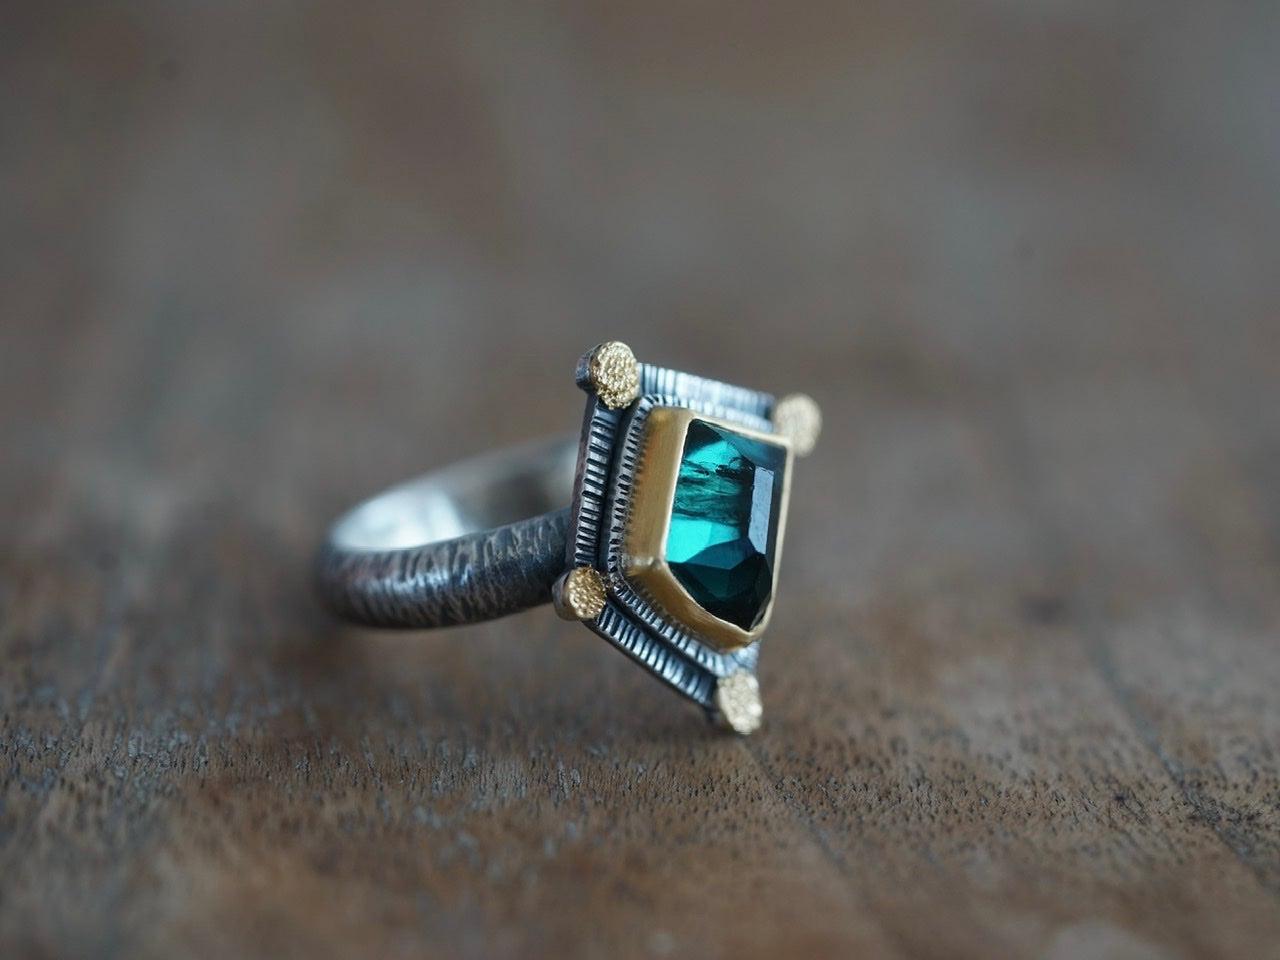 Irregularly shaped, teal blue, faceted tourmaline and 22k gold statement ring, size 7.75